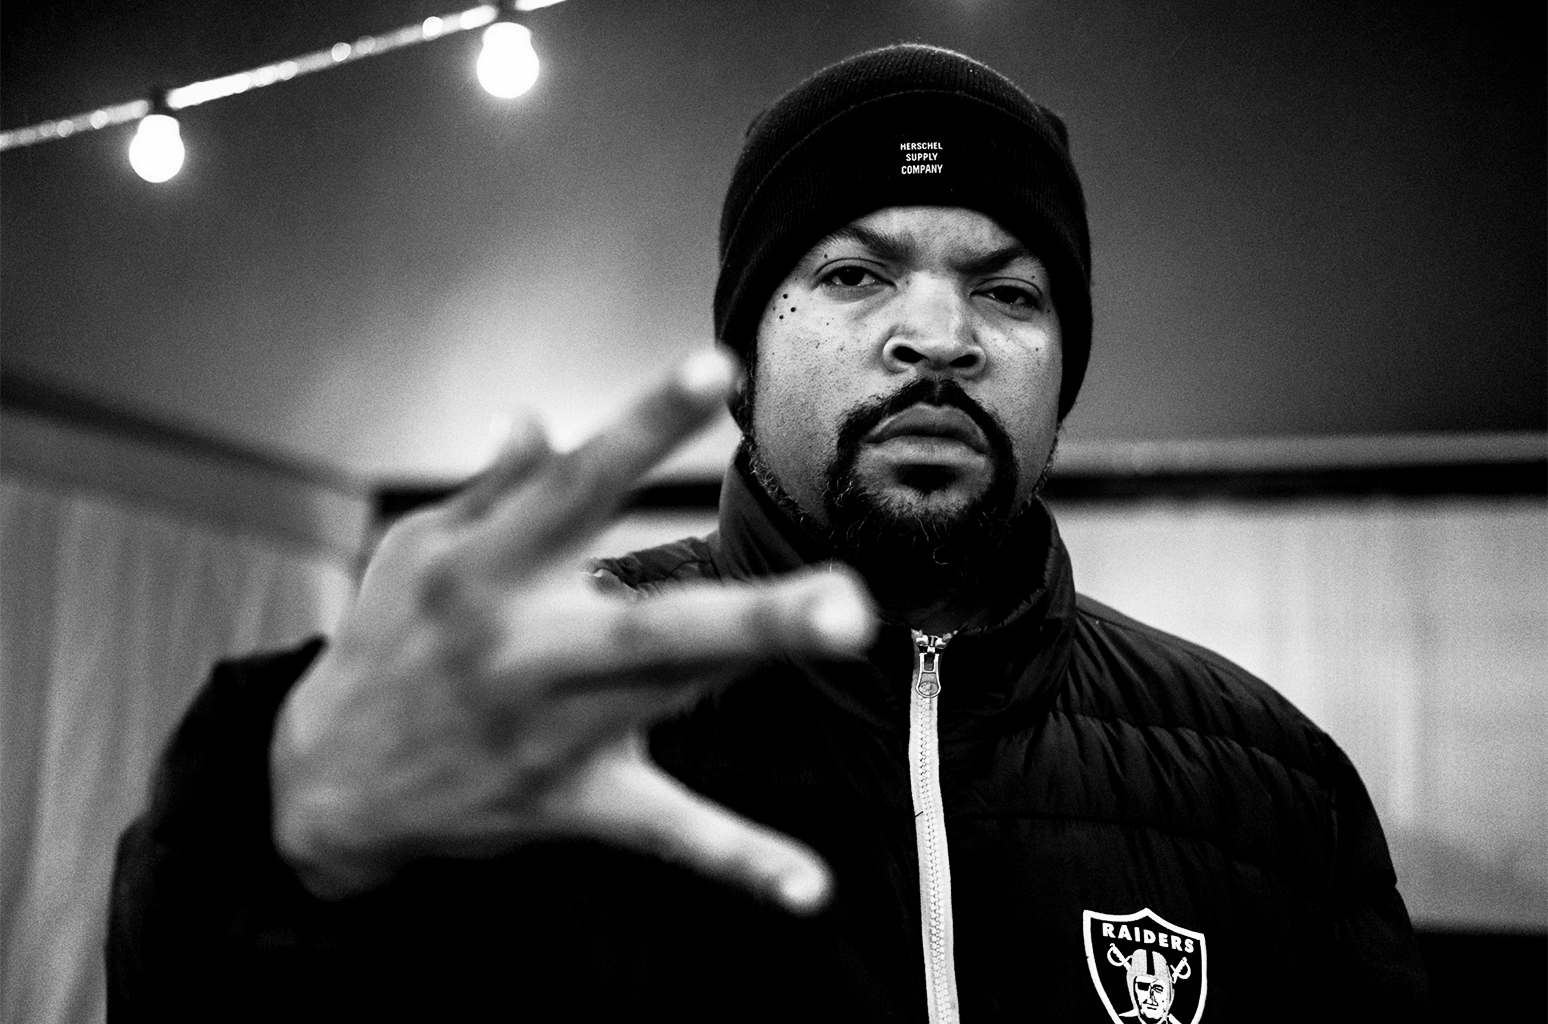 Ice Cube's Latest Song Talks Directly About the Black Lives Matter Movement